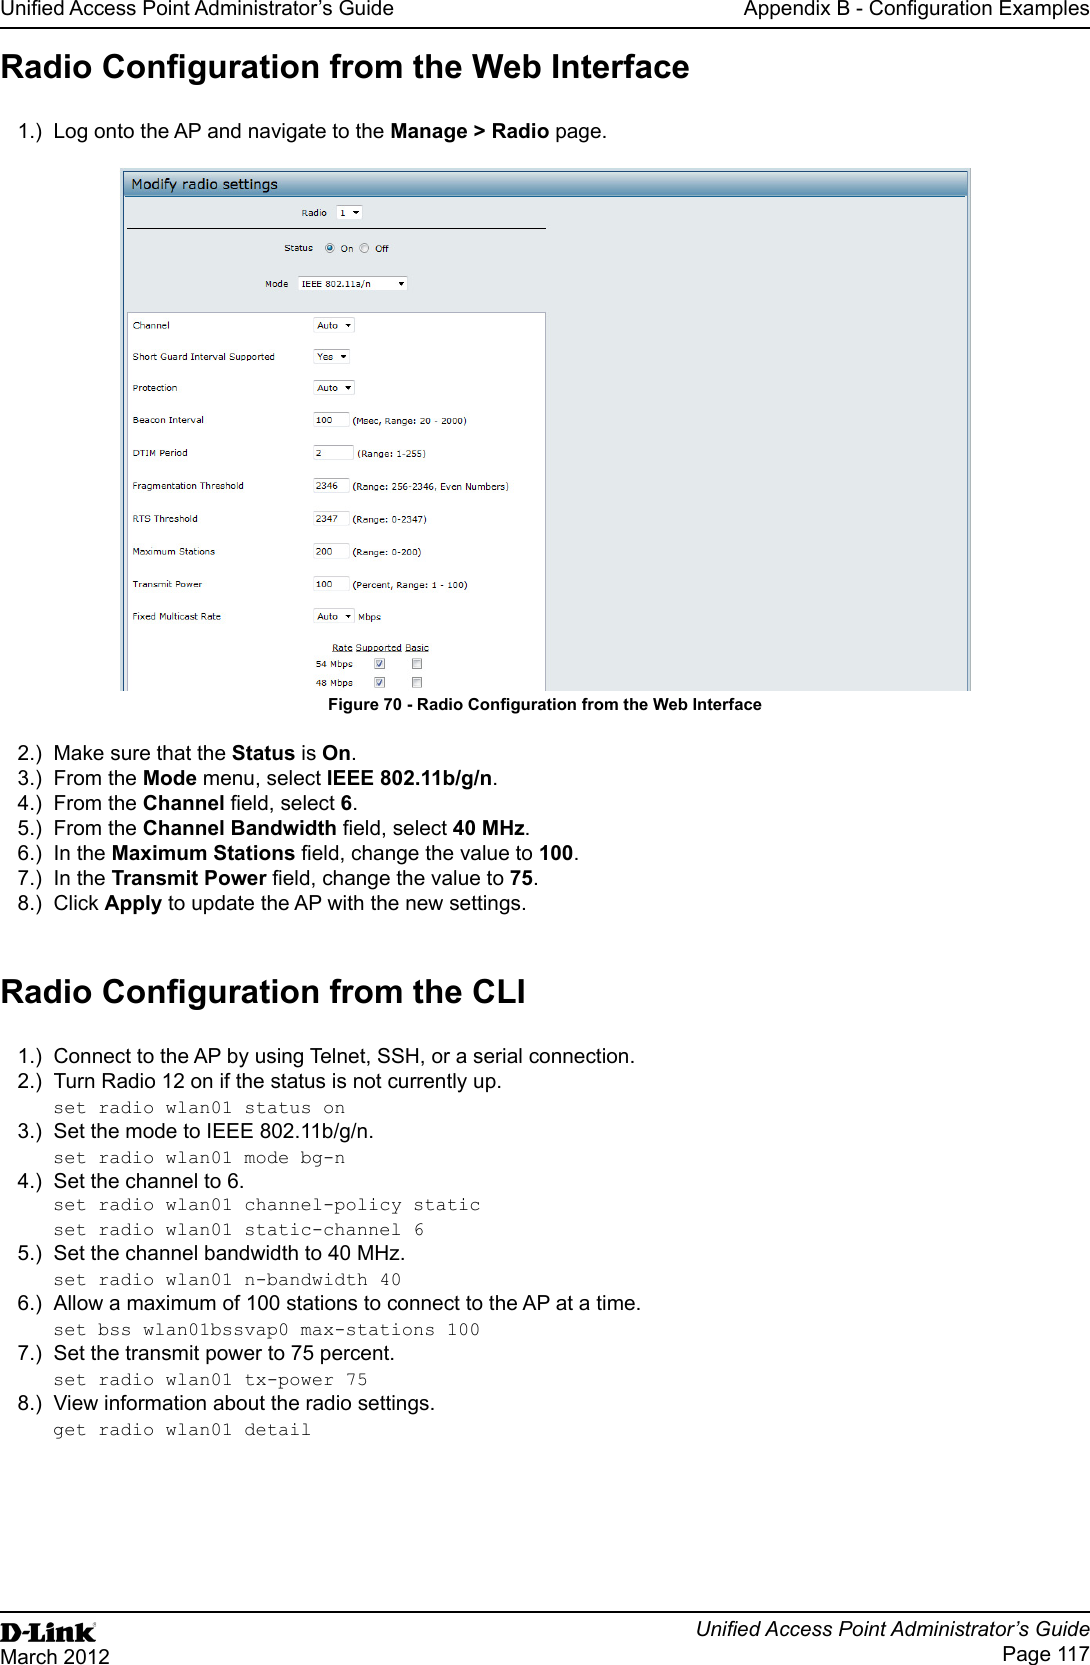 Unied Access Point Administrator’s GuideUnied Access Point Administrator’s GuidePage 117March 2012Appendix B - Conguration ExamplesRadio Conguration from the Web Interface1.)  Log onto the AP and navigate to the Manage &gt; Radio page.Figure 70 - Radio Conguration from the Web Interface2.)  Make sure that the Status is On.3.)  From the Mode menu, select IEEE 802.11b/g/n.4.)  From the Channel eld, select 6. 5.)  From the Channel Bandwidth eld, select 40 MHz.6.)  In the Maximum Stations eld, change the value to 100.7.)  In the Transmit Power eld, change the value to 75.8.)  Click Apply to update the AP with the new settings.Radio Conguration from the CLI1.)  Connect to the AP by using Telnet, SSH, or a serial connection.2.)  Turn Radio 12 on if the status is not currently up.set radio wlan01 status on3.)  Set the mode to IEEE 802.11b/g/n.set radio wlan01 mode bg-n4.)  Set the channel to 6. set radio wlan01 channel-policy staticset radio wlan01 static-channel 65.)  Set the channel bandwidth to 40 MHz.set radio wlan01 n-bandwidth 406.)  Allow a maximum of 100 stations to connect to the AP at a time.set bss wlan01bssvap0 max-stations 1007.)  Set the transmit power to 75 percent.set radio wlan01 tx-power 758.)  View information about the radio settings.get radio wlan01 detail